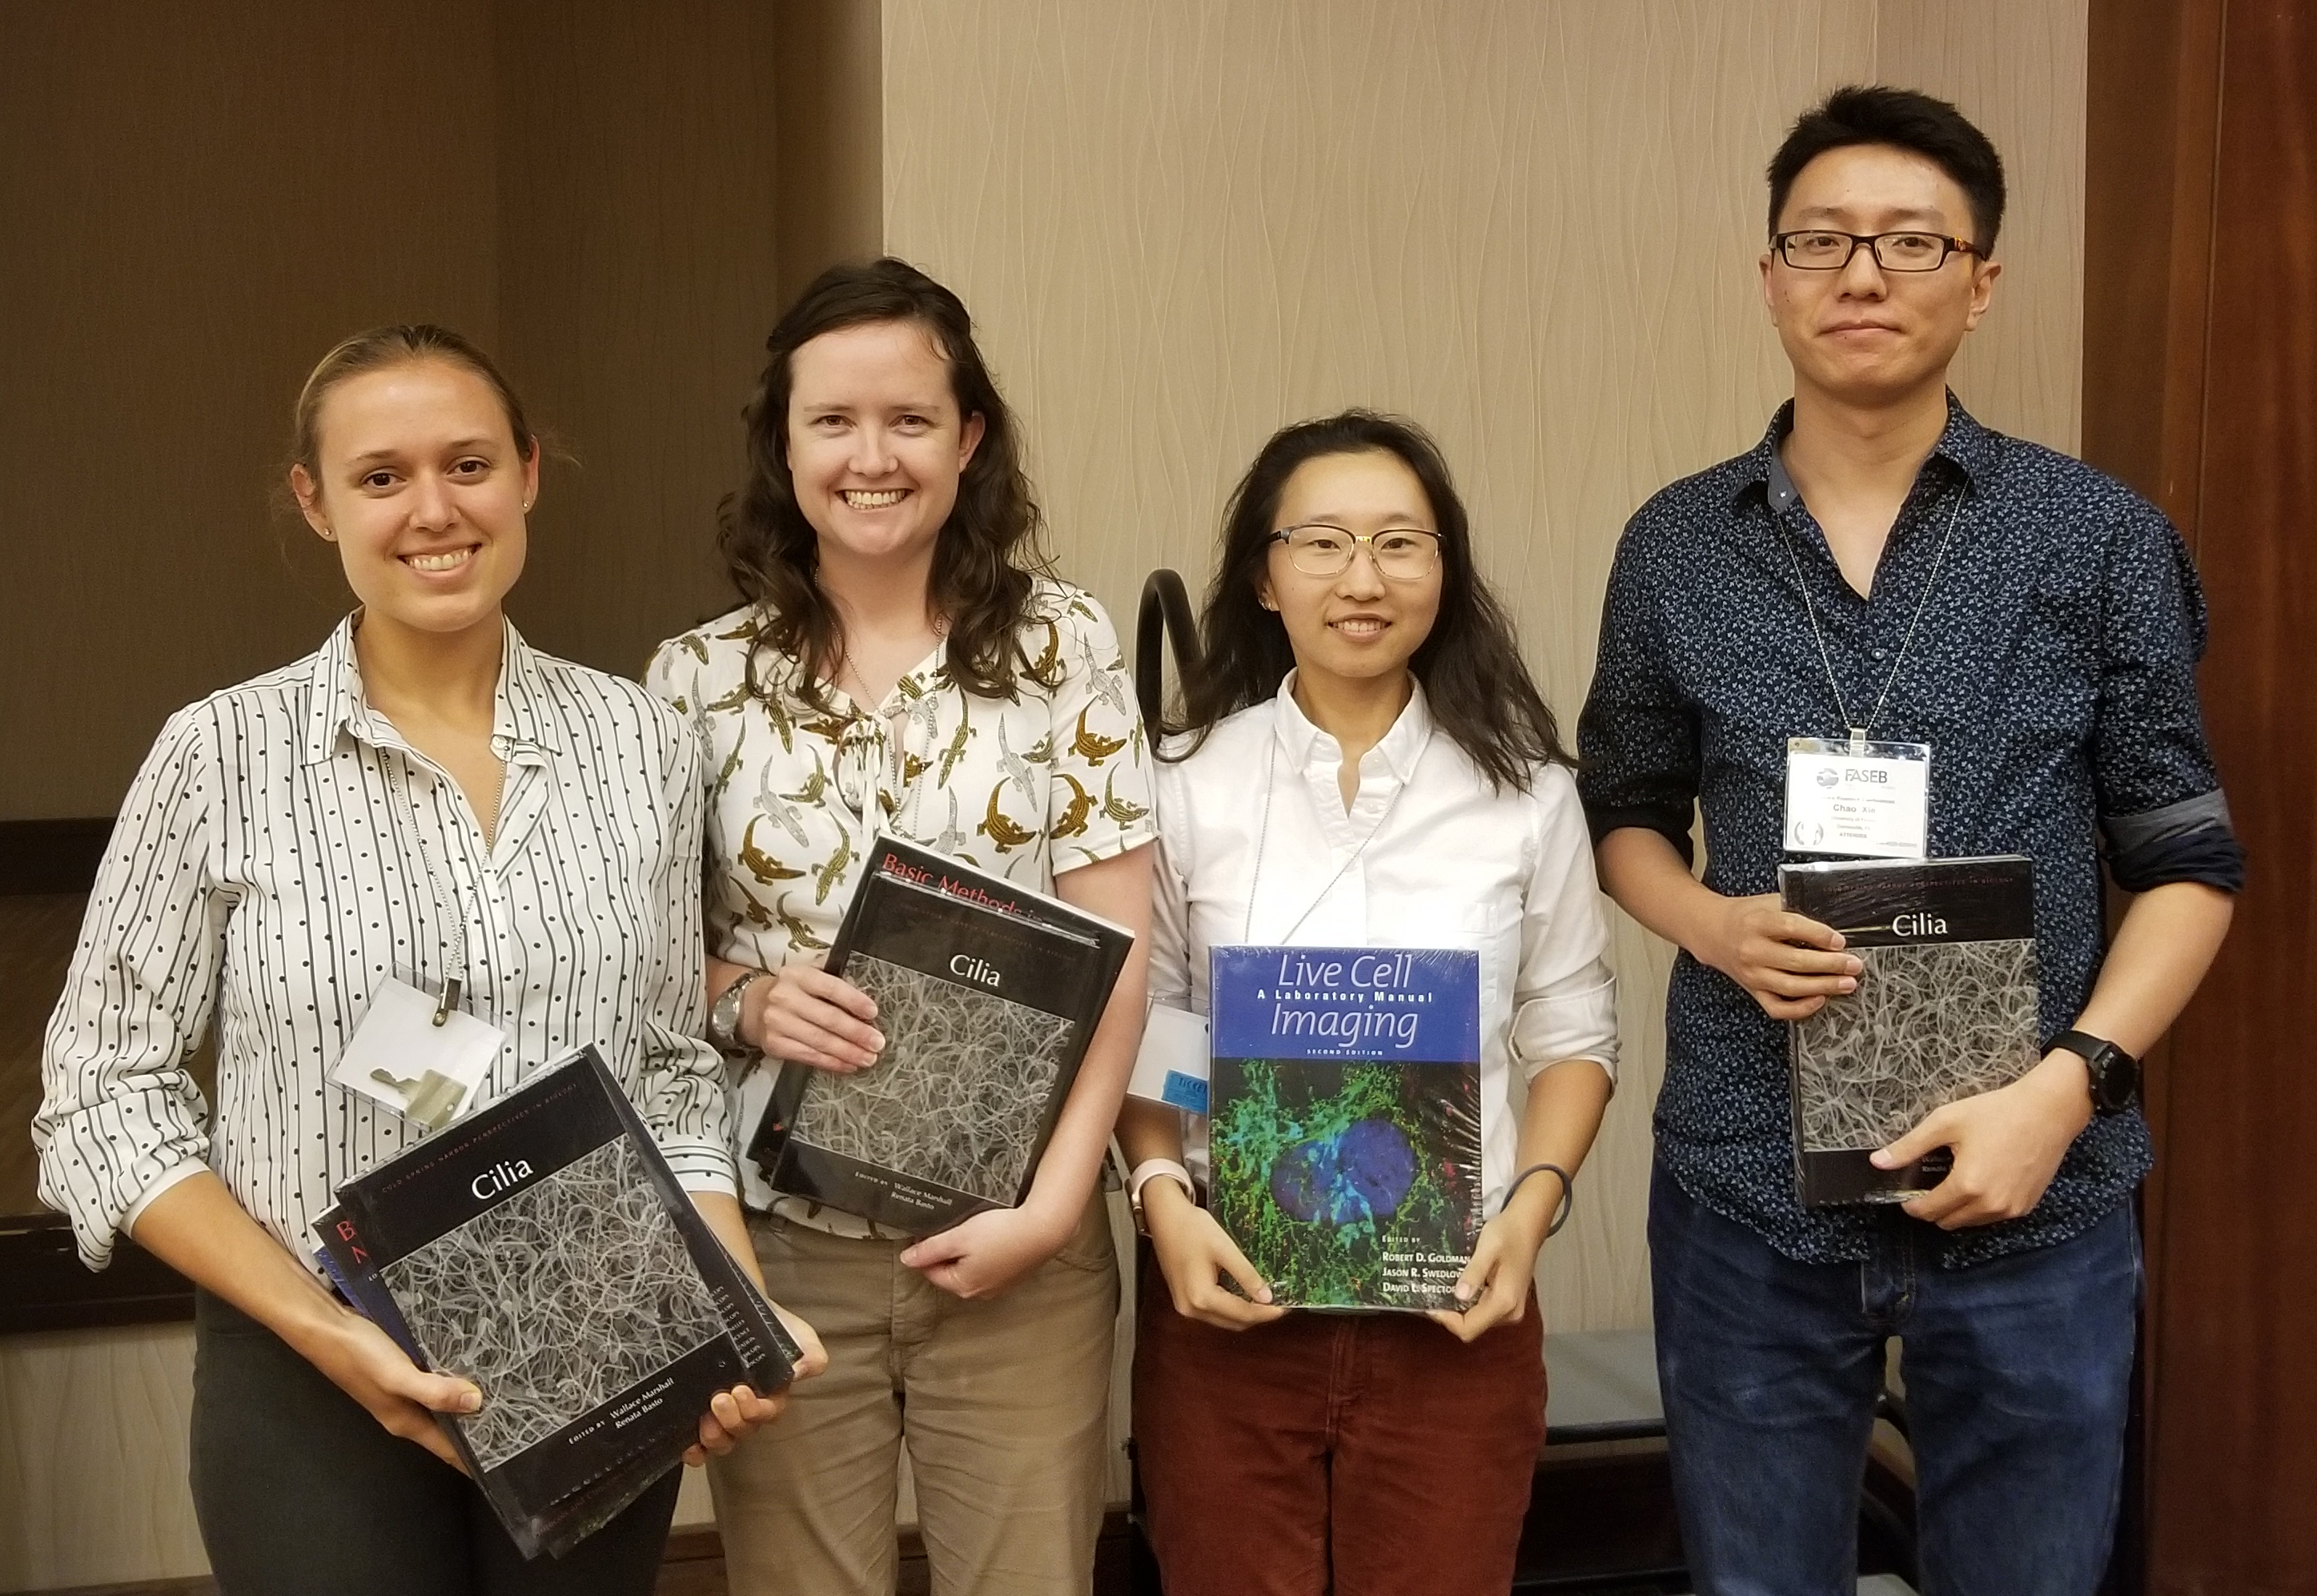 Graduate student winners for oral presentations from left to right: Jenna Wingfield (UGA), Anne Meyer-Miner (University of Toronto), Kewei Yu (UGA) and Chao Xie (University of Florida).